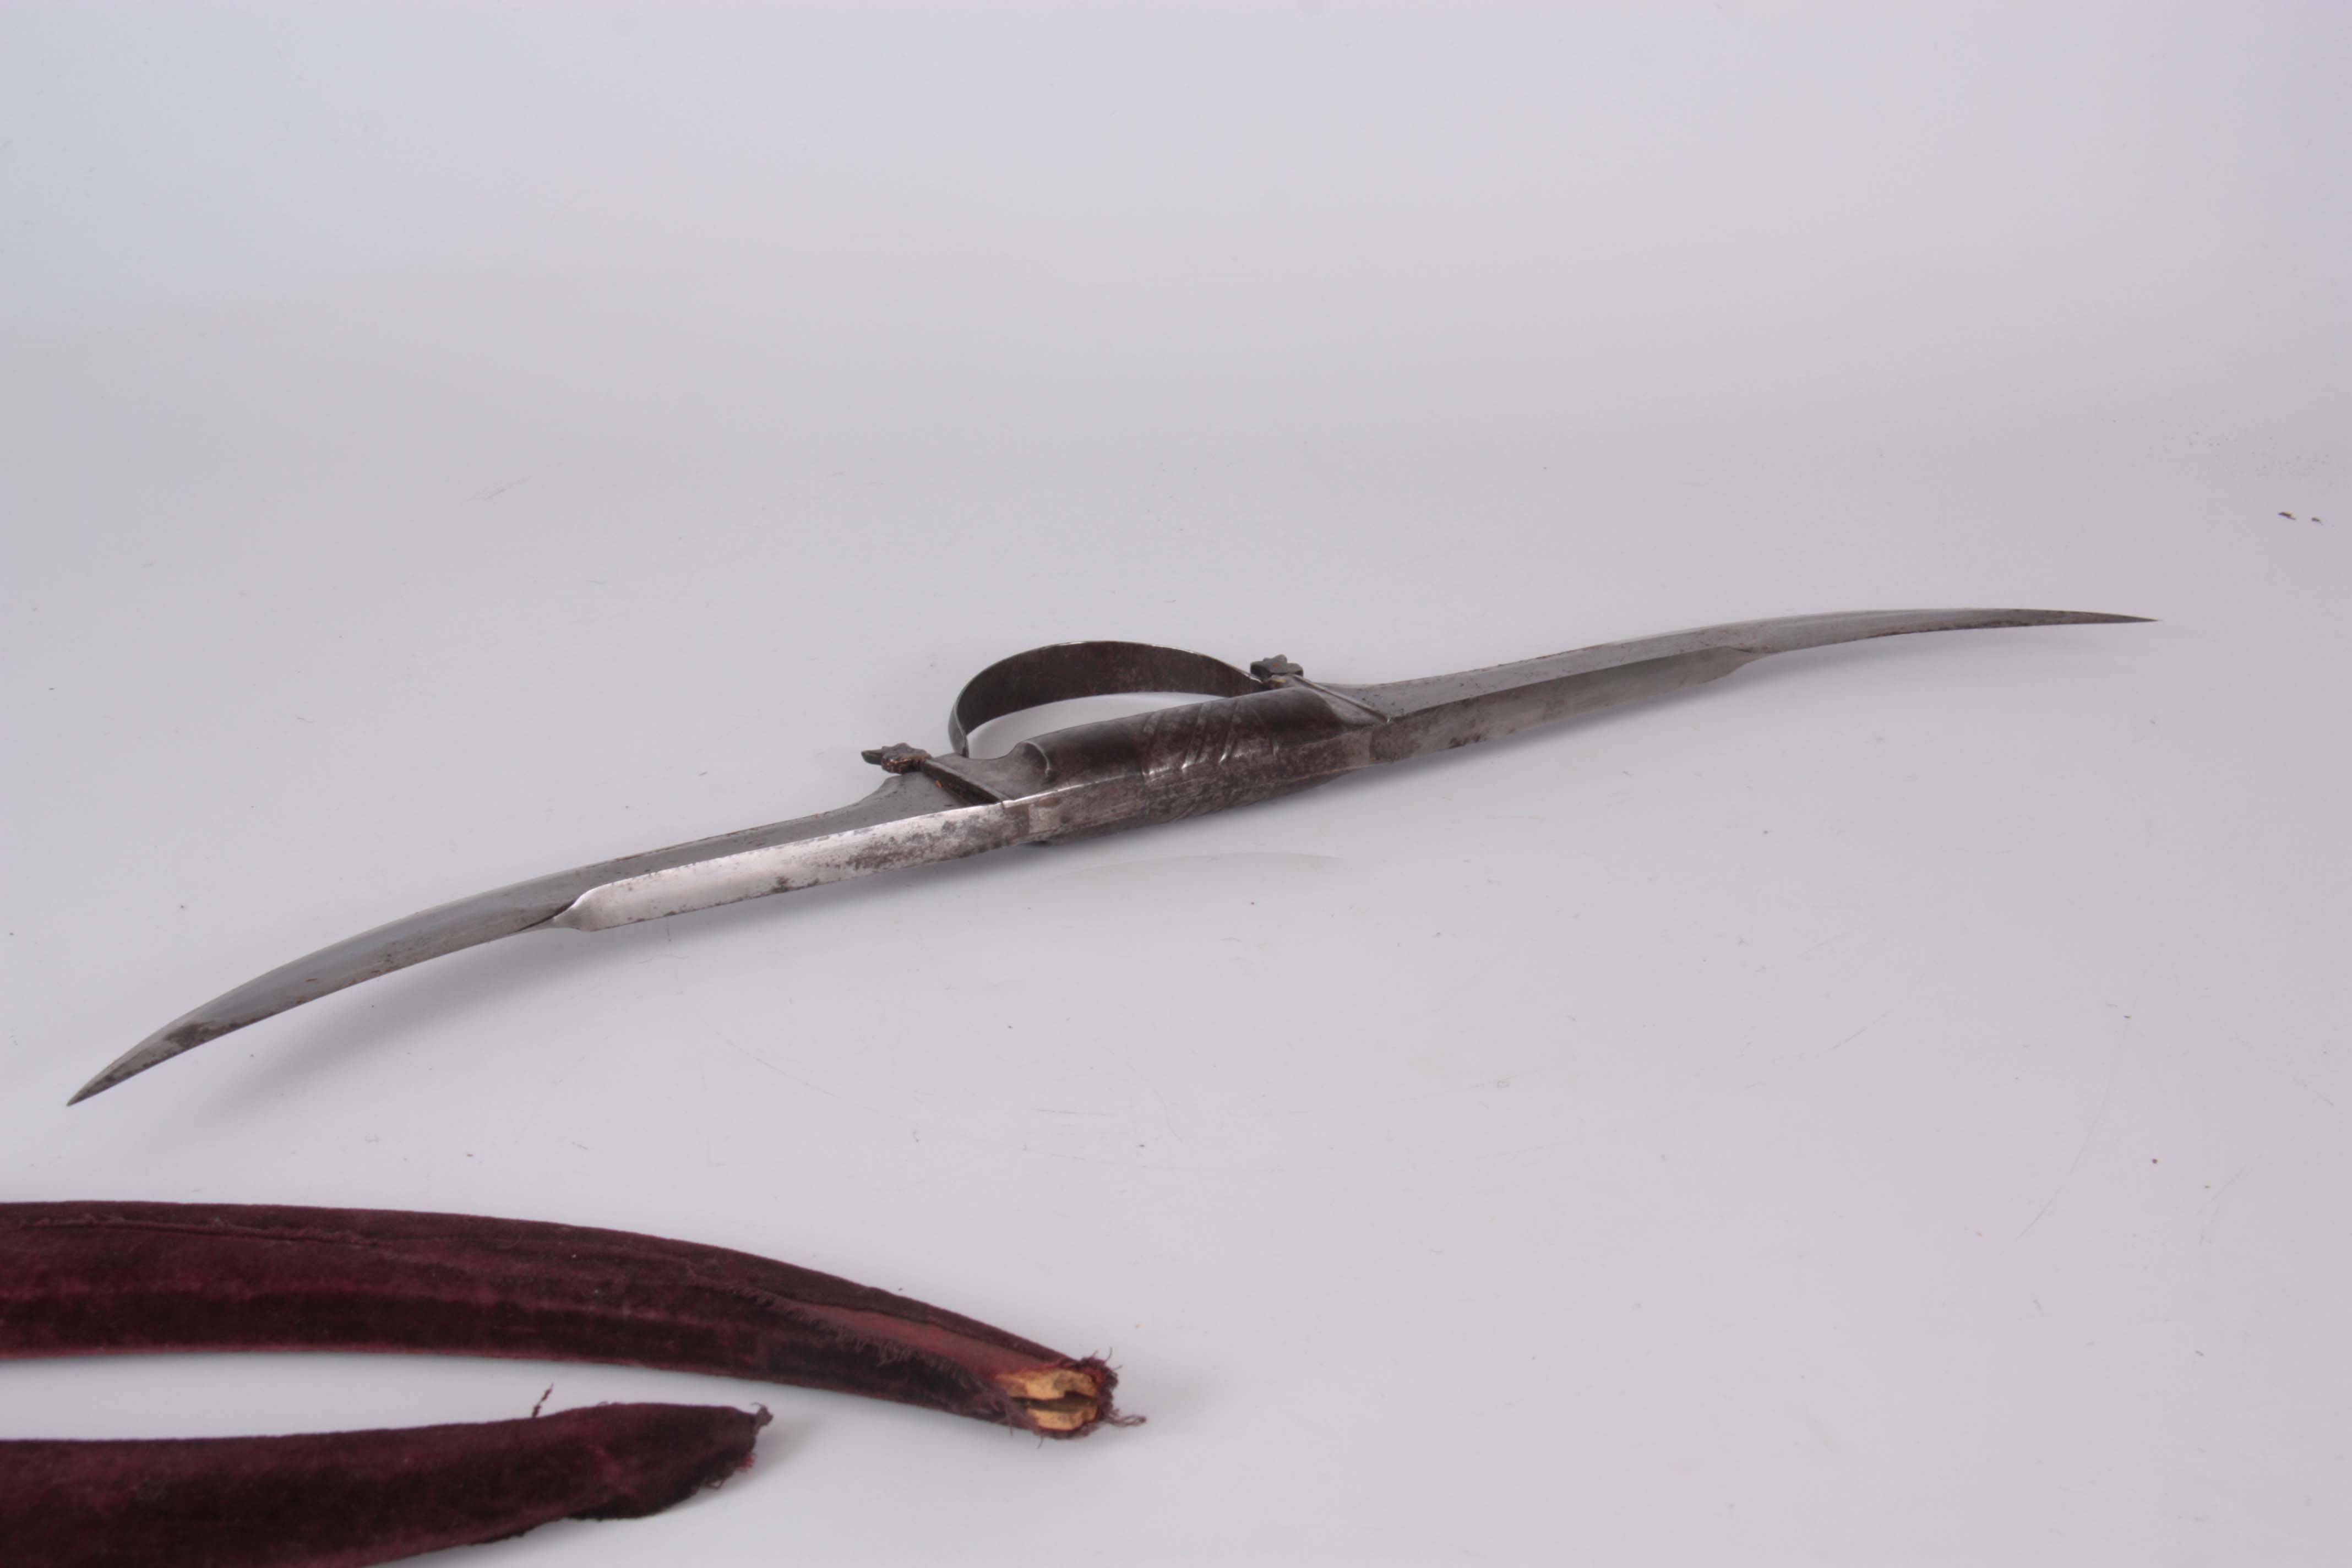 A RARE 18TH CENTURY RAJPUT DOUBLE DAGGER, HALADIE having two 9" curved steel blades joined by a - Image 4 of 8